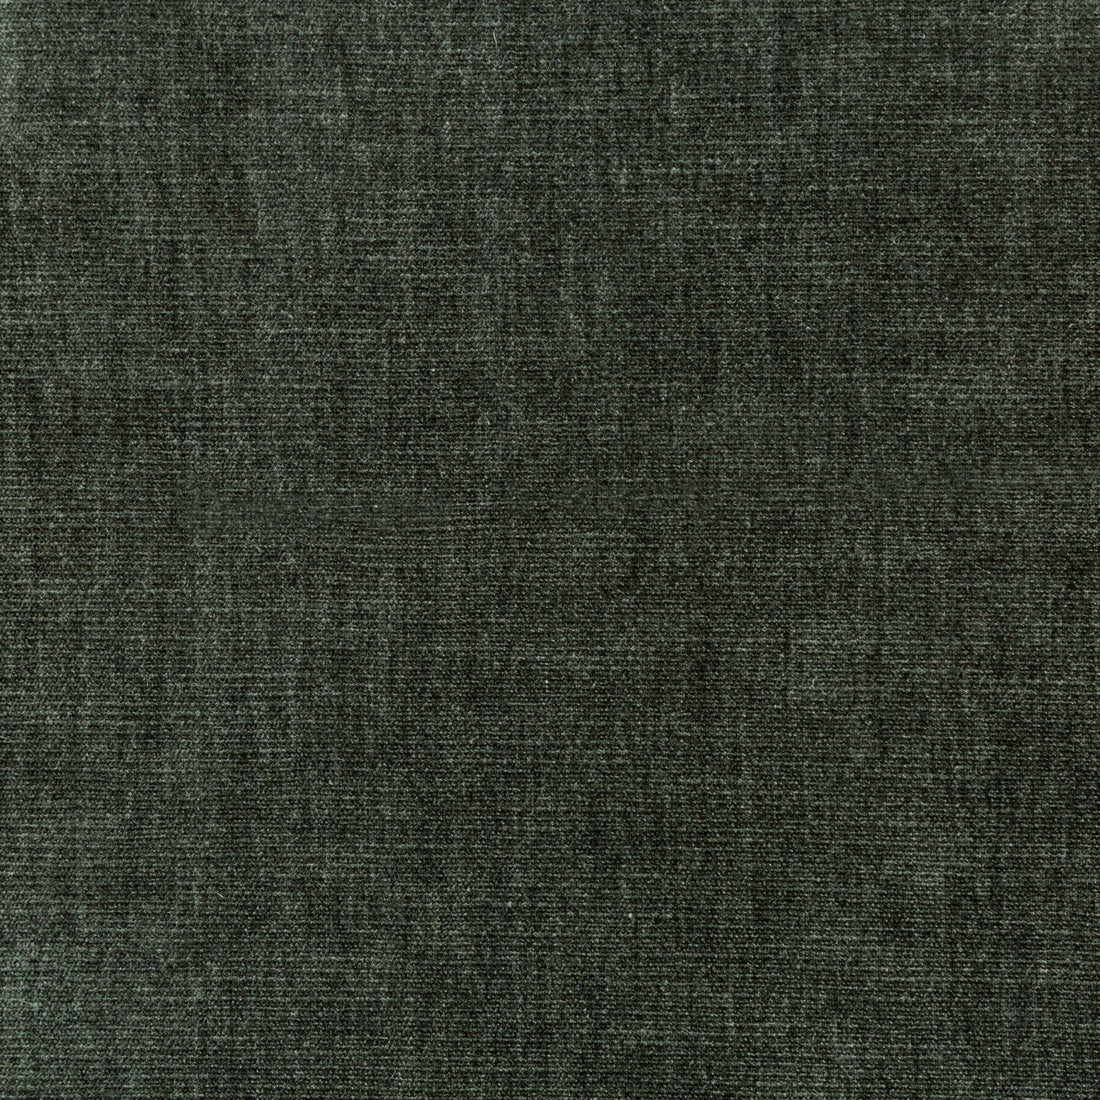 Kravet Smart fabric in 36076-811 color - pattern 36076.811.0 - by Kravet Smart in the Sumptuous Chenille II collection